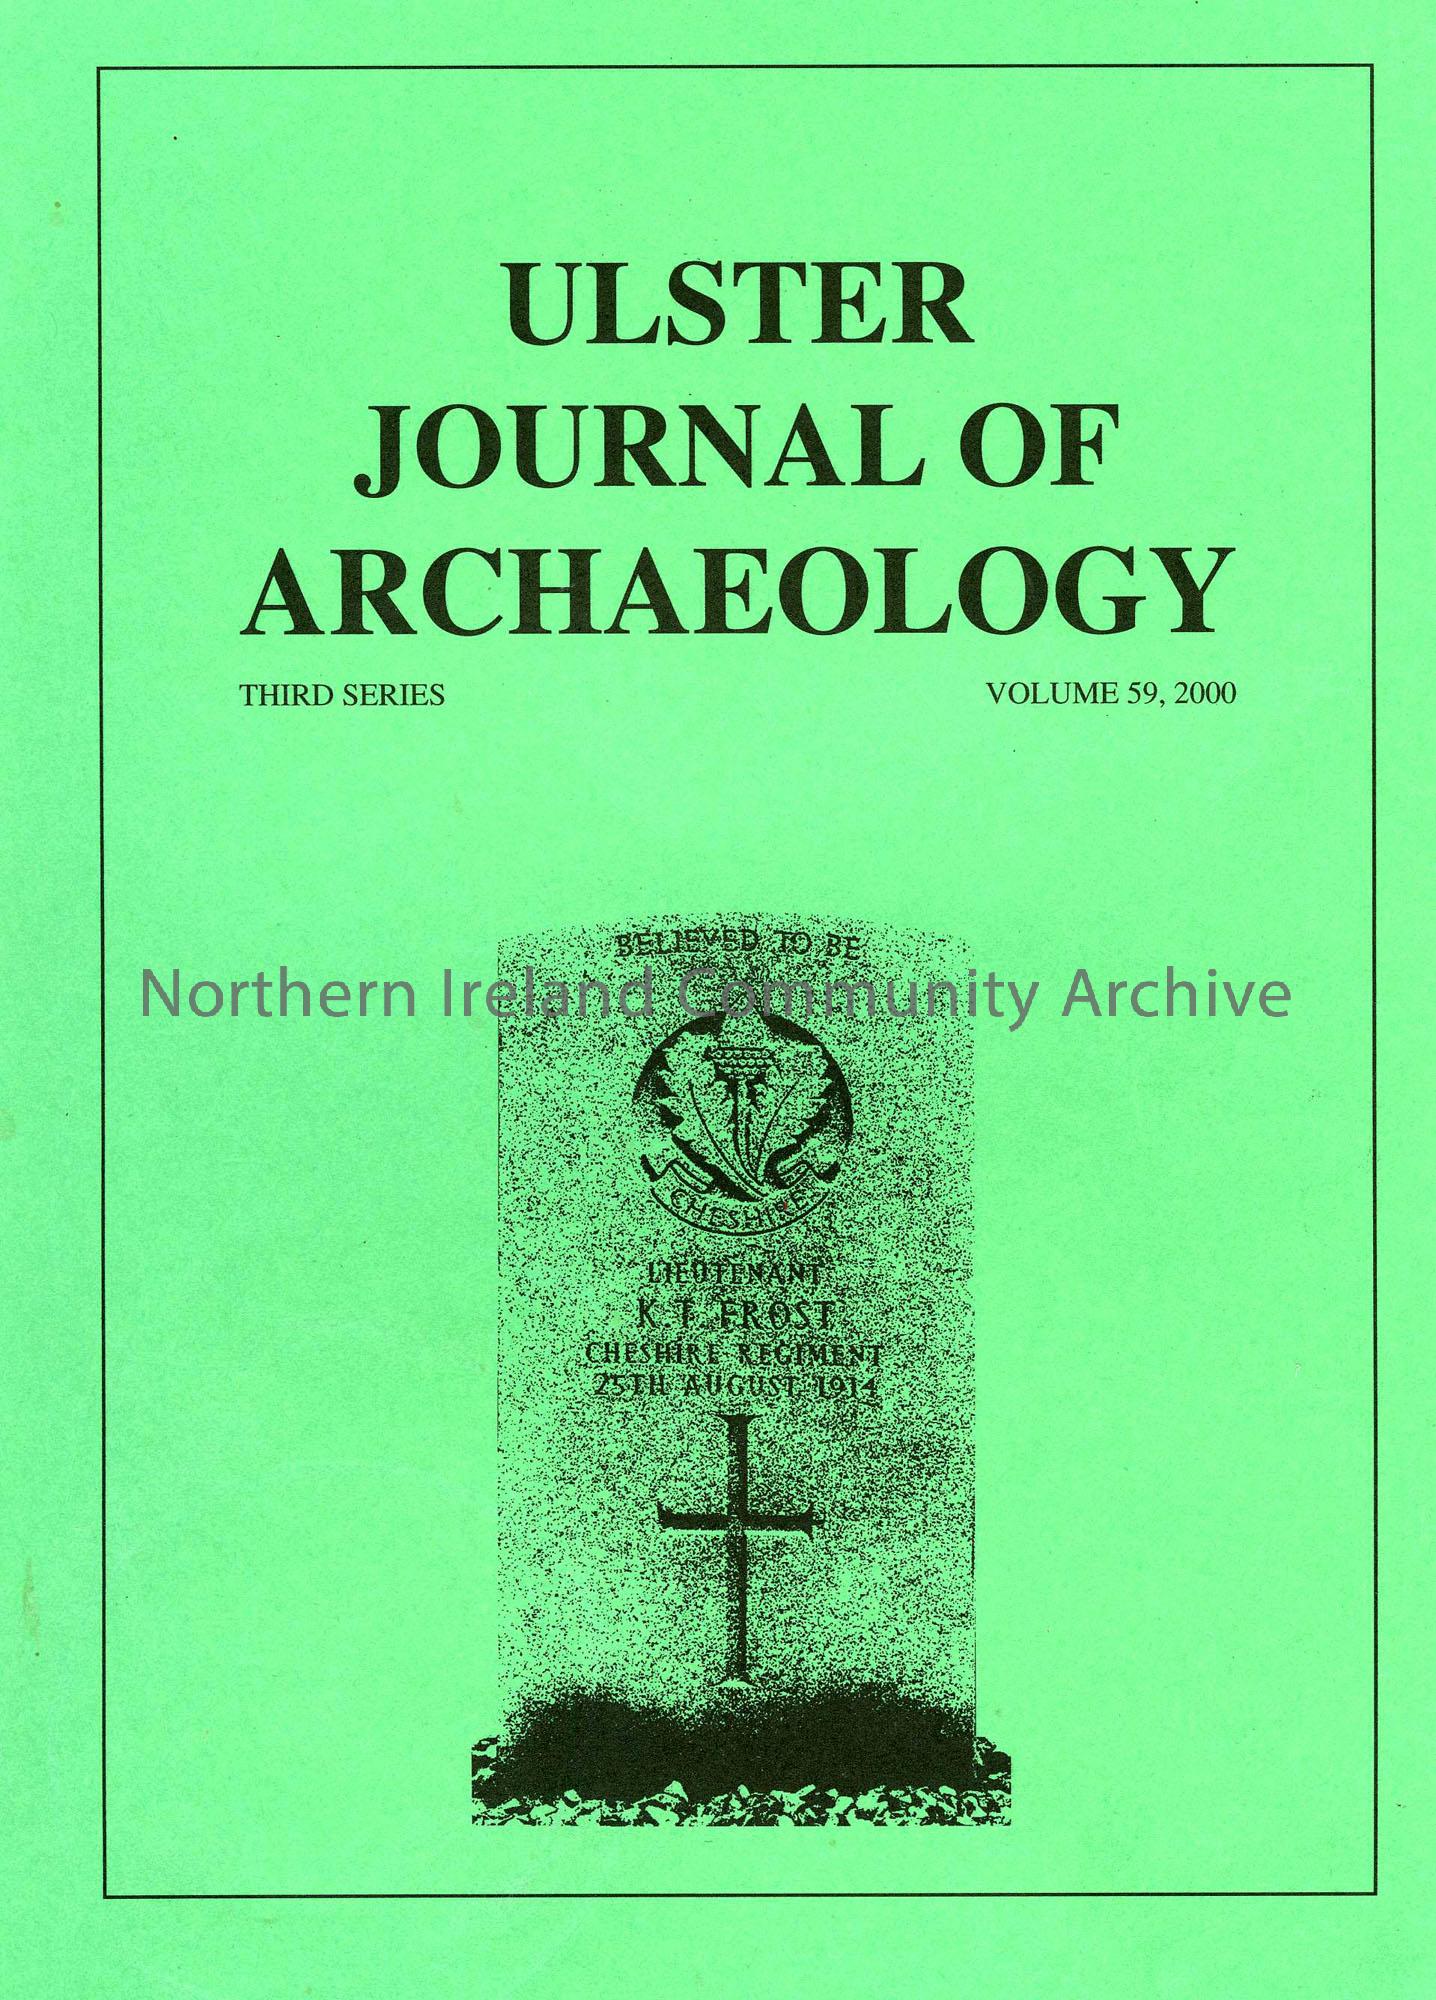 book titled, Ulster Journal of Archaeology. Third Series Volume 59, 2000 (6165)